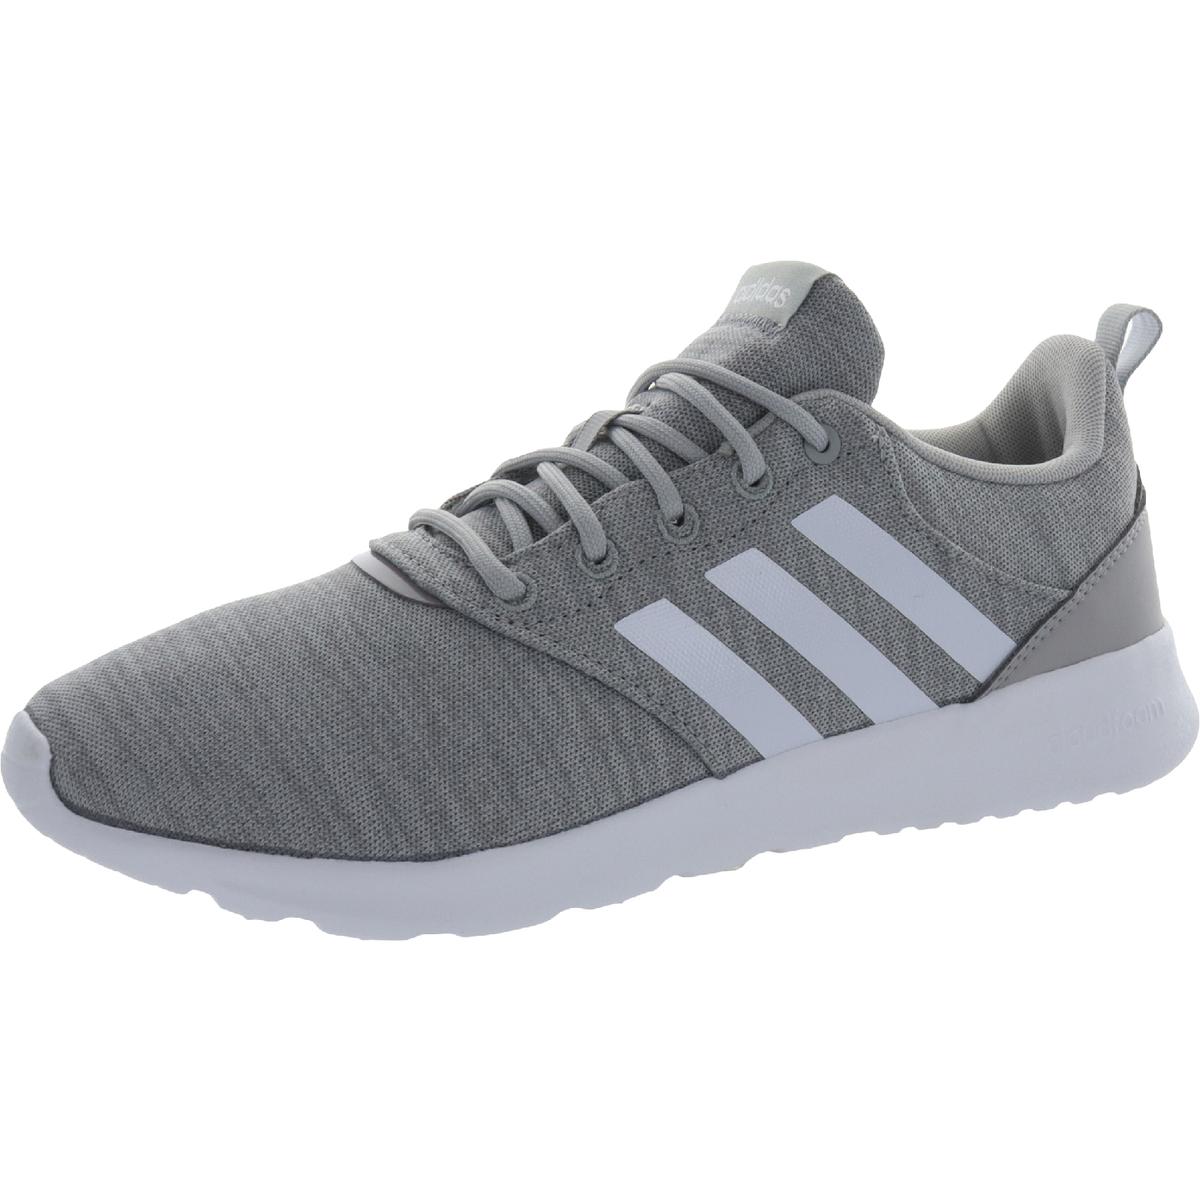 Adidas QT Racer 2.0 Womens Knit Lace Up Casual and Fashion Sneakers